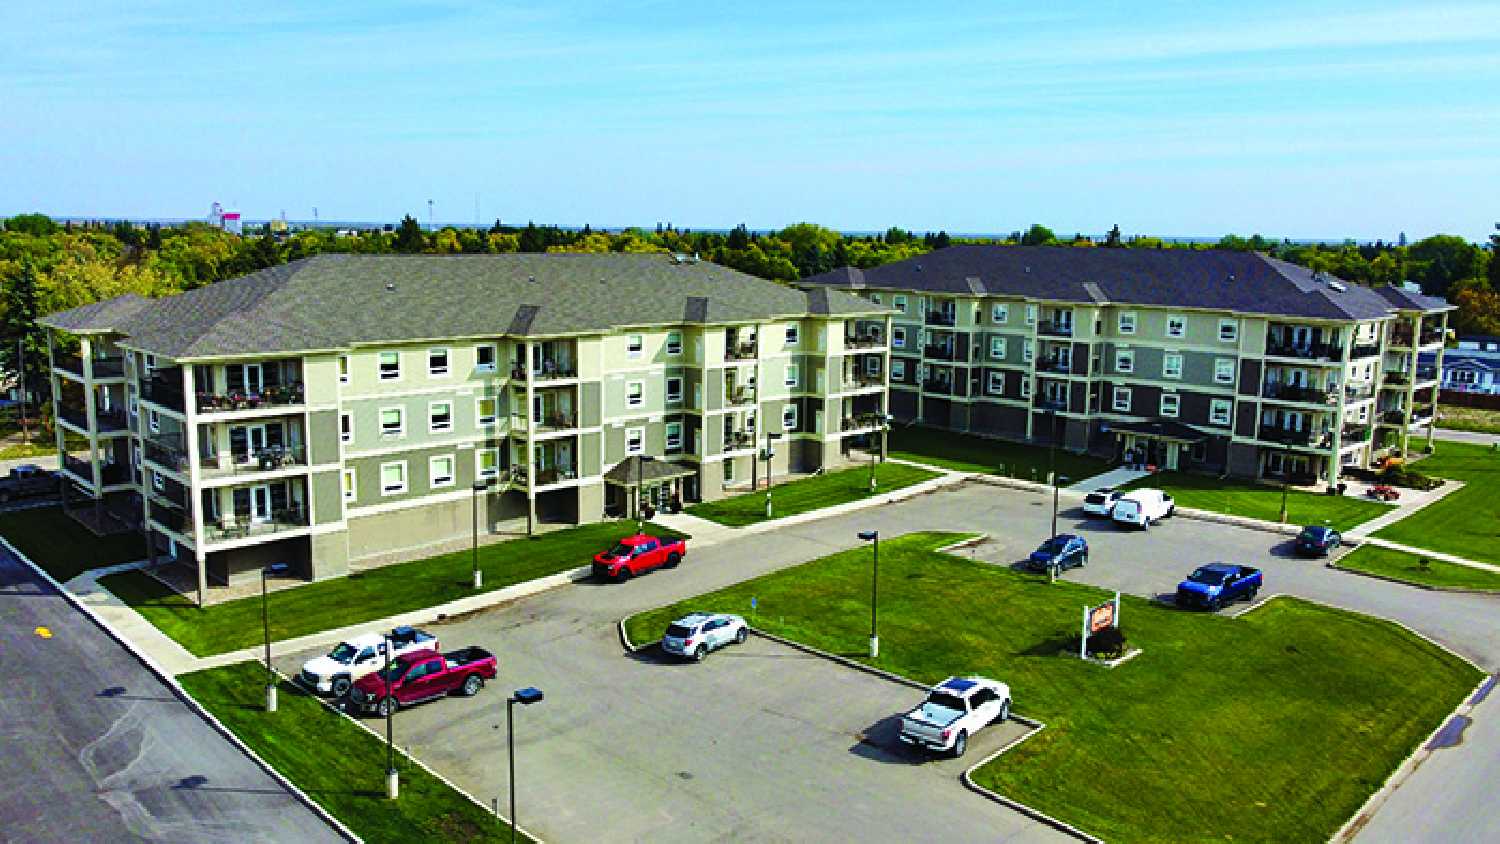 Bridge Road Developments is the new owner of Pipestone Villas in Moosomin, purchasing shares from the local shareholders who helped get the project off the ground. 